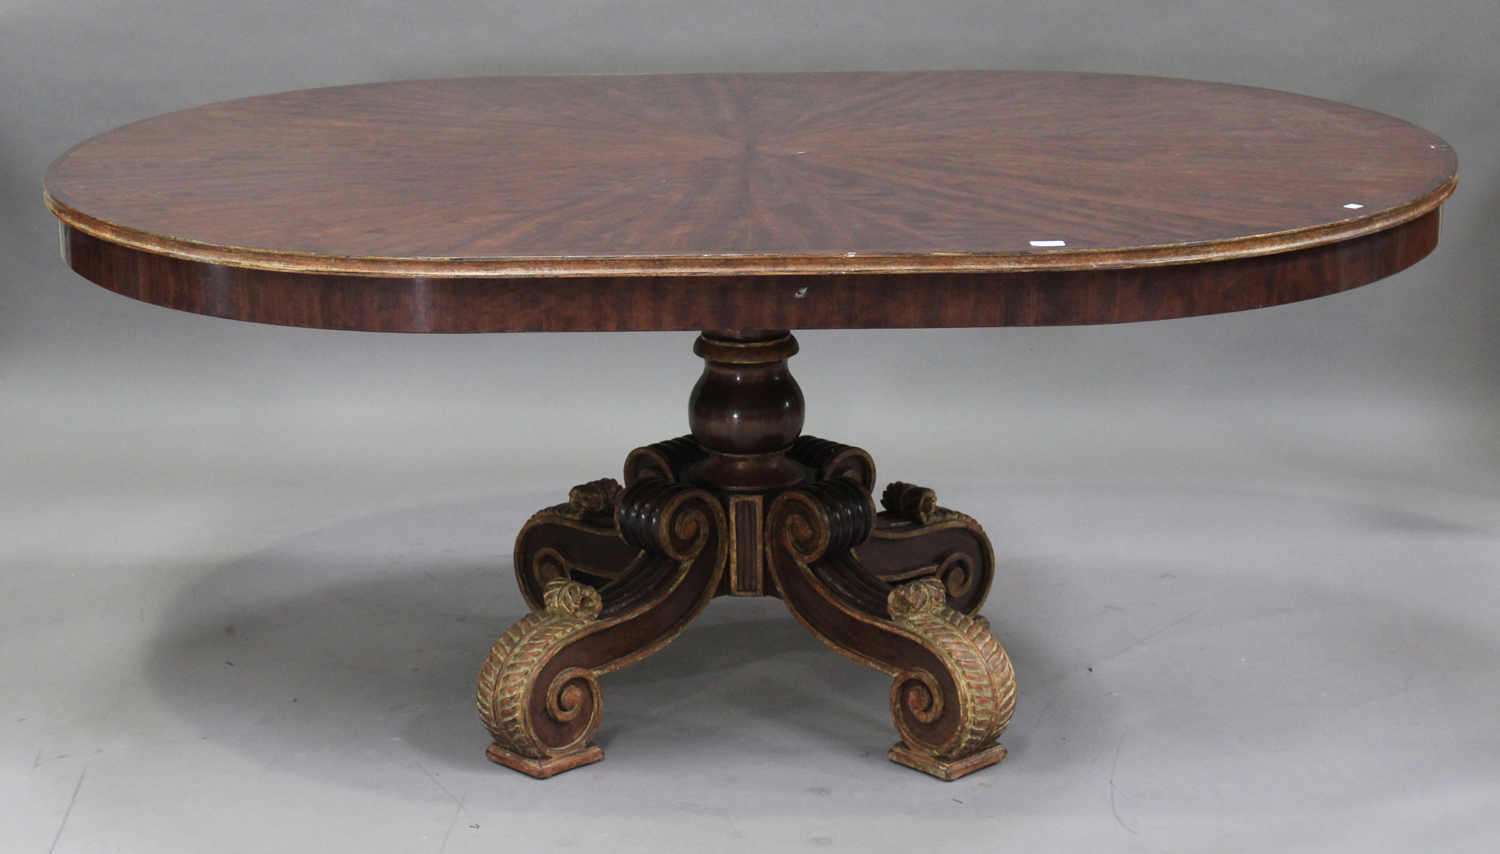 A 20th century American figured mahogany and gilt painted dining table, the rounded top raised on